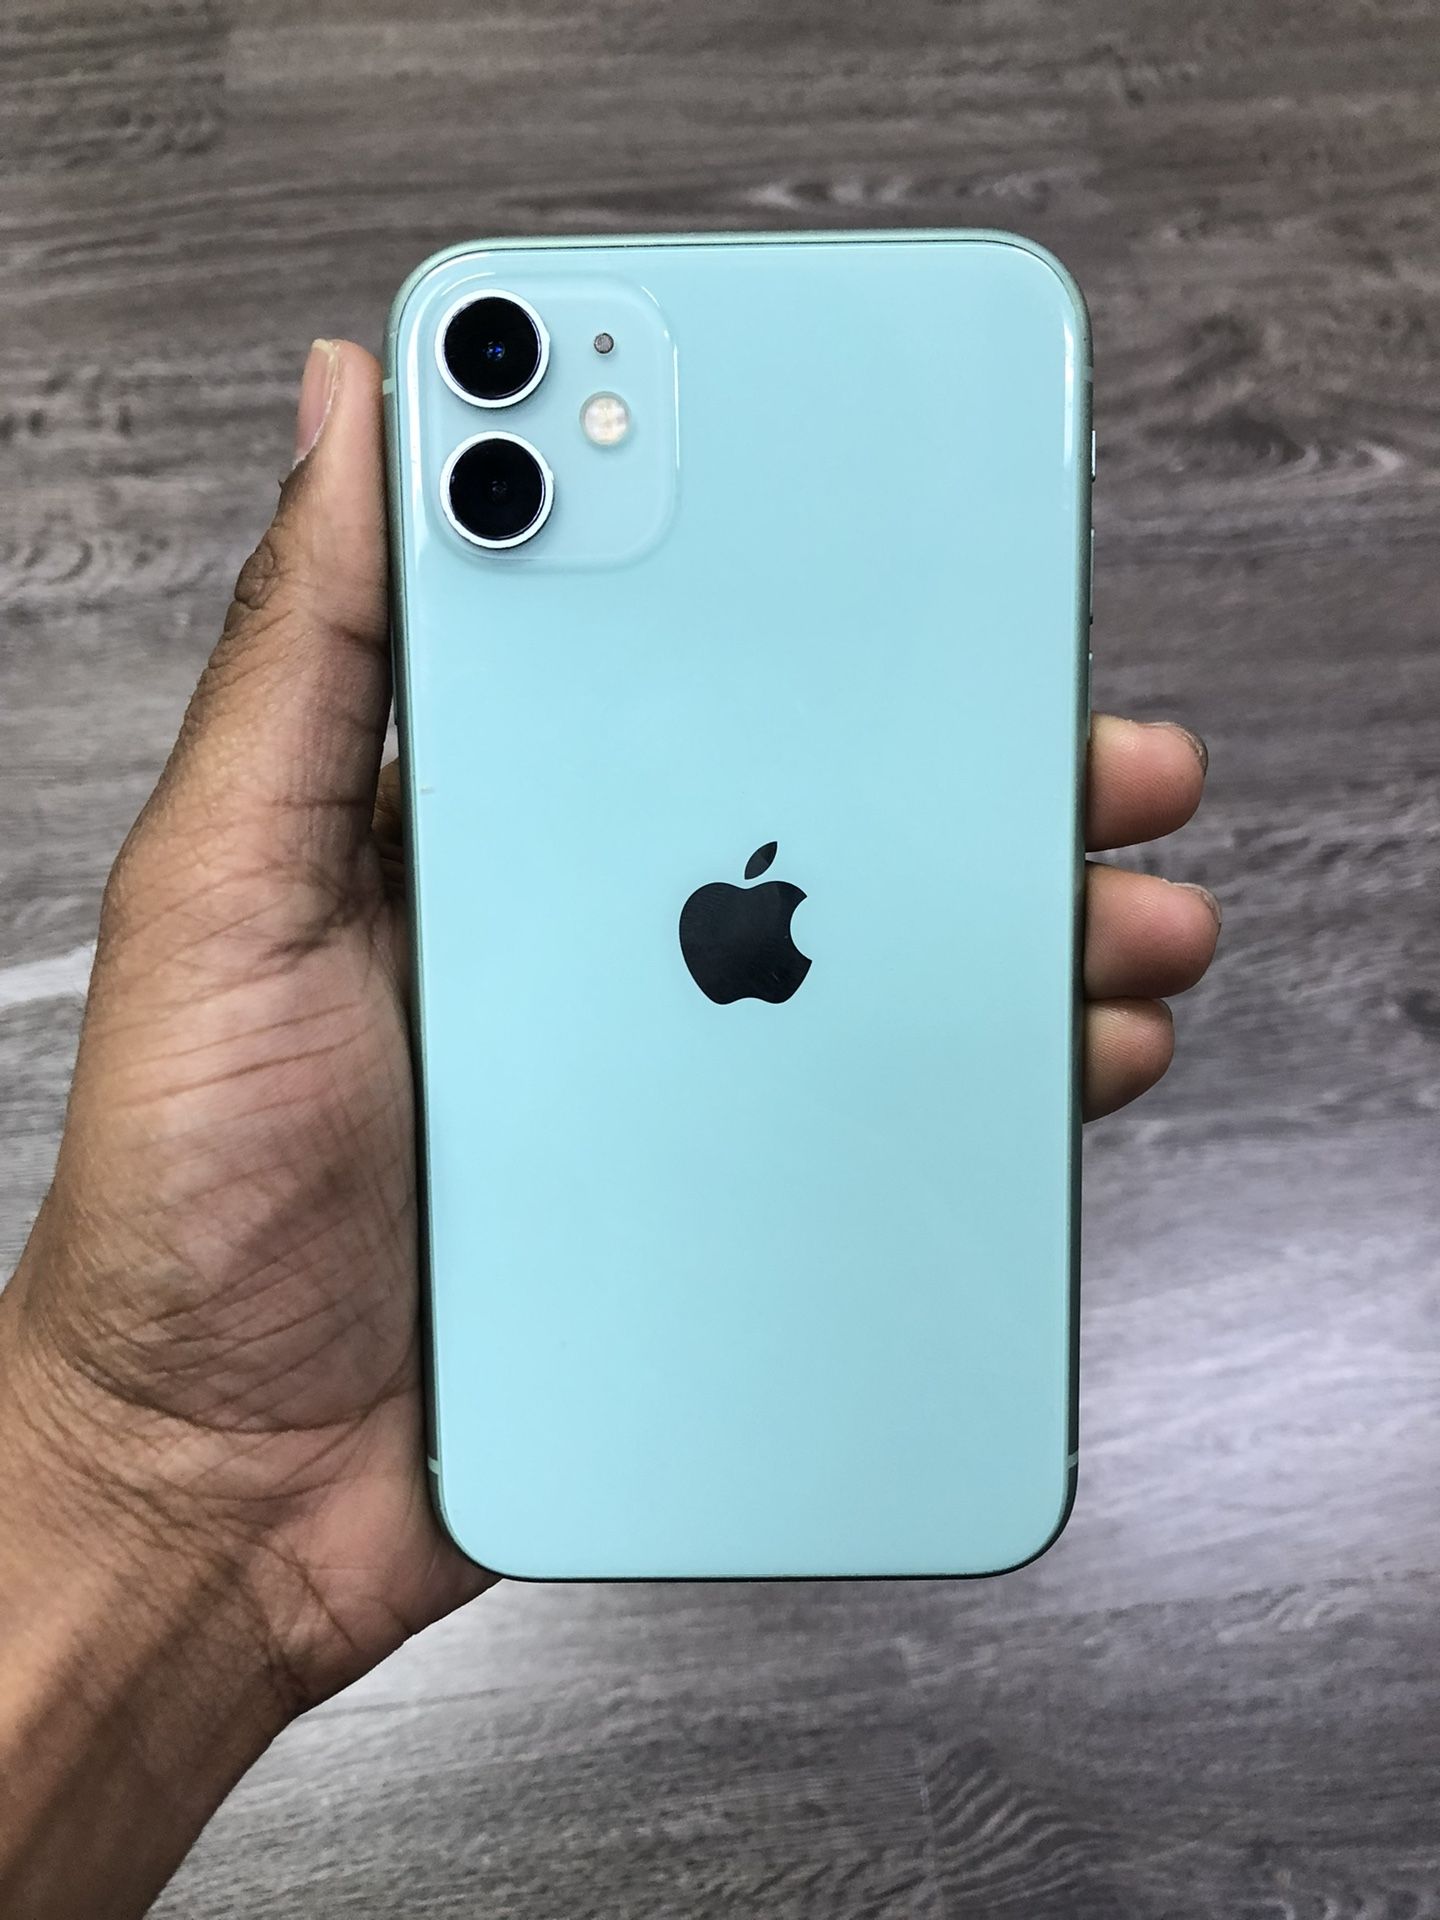 iPhone 11 128GB Unlocked 🎁MOTHERS DAY SPECIAL OFFER @ $205  Only Offer Ends 13th May😱